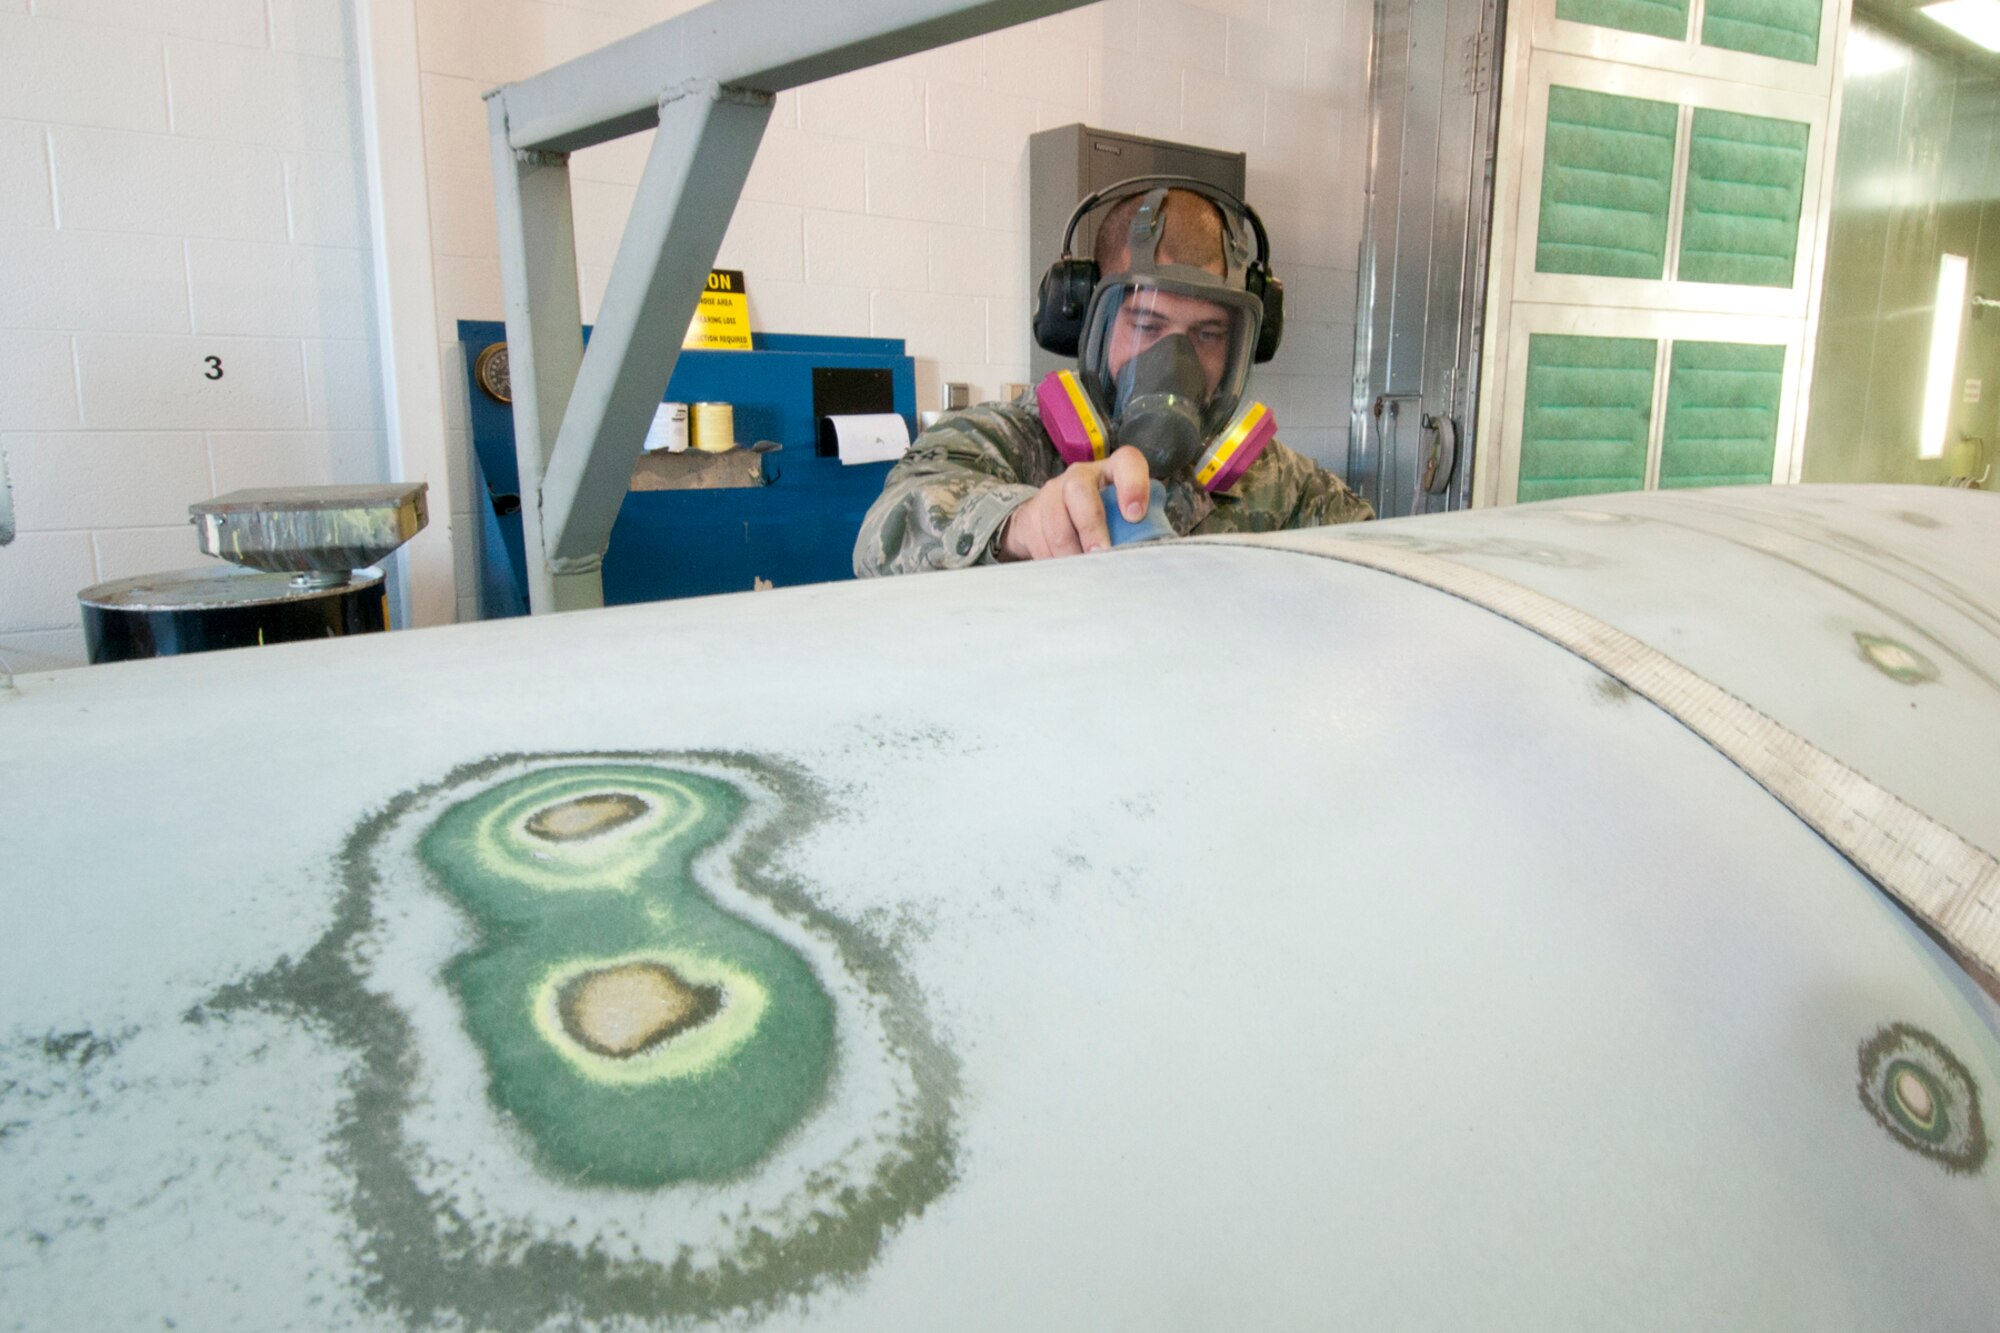 120915-Z-NJ721-014: Airman 1st Class Dan Butcher uses a sander to prepare a centerline tank for a fresh coat of paint, while working in the painting bay of the 127th Maintenance Squadron at Selfridge Air National Guard Base, Mich., Sept. 15, 2012. The sander has a vacuum attachment to control dust. While maintenance Airmen at the base said the paint on an aircraft plays a major role in corrosion control and has other benefits, they also take a great deal of pride in the appearance of the aircraft they maintain.  The centerline tank is used by A-10 Thunderbolt II aircraft assigned to the base as an additional, external fuel tank when the aircraft must make long treks, such as a trip overseas. (Air National Guard photo by TSgt. Robert Hanet)